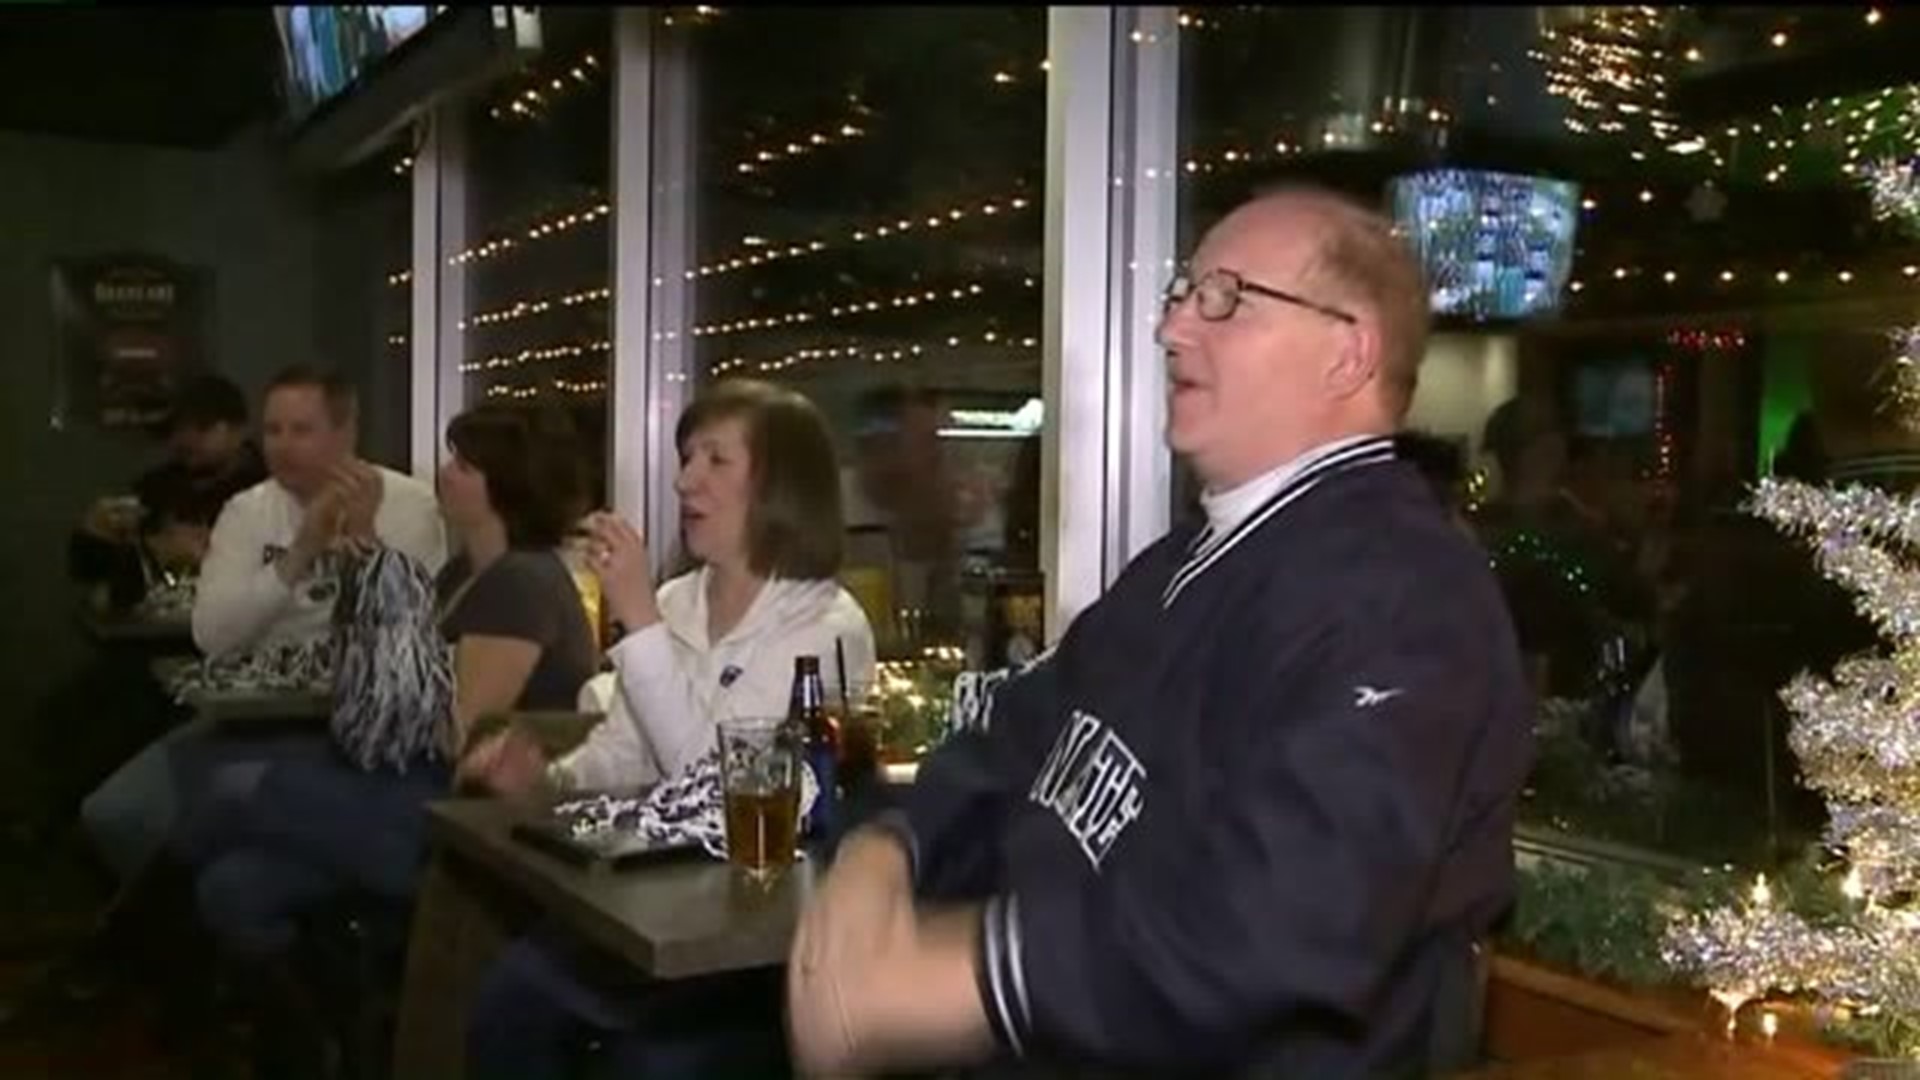 Penn State Fans in Luzerne Gather for Rose Bowl Watch Party